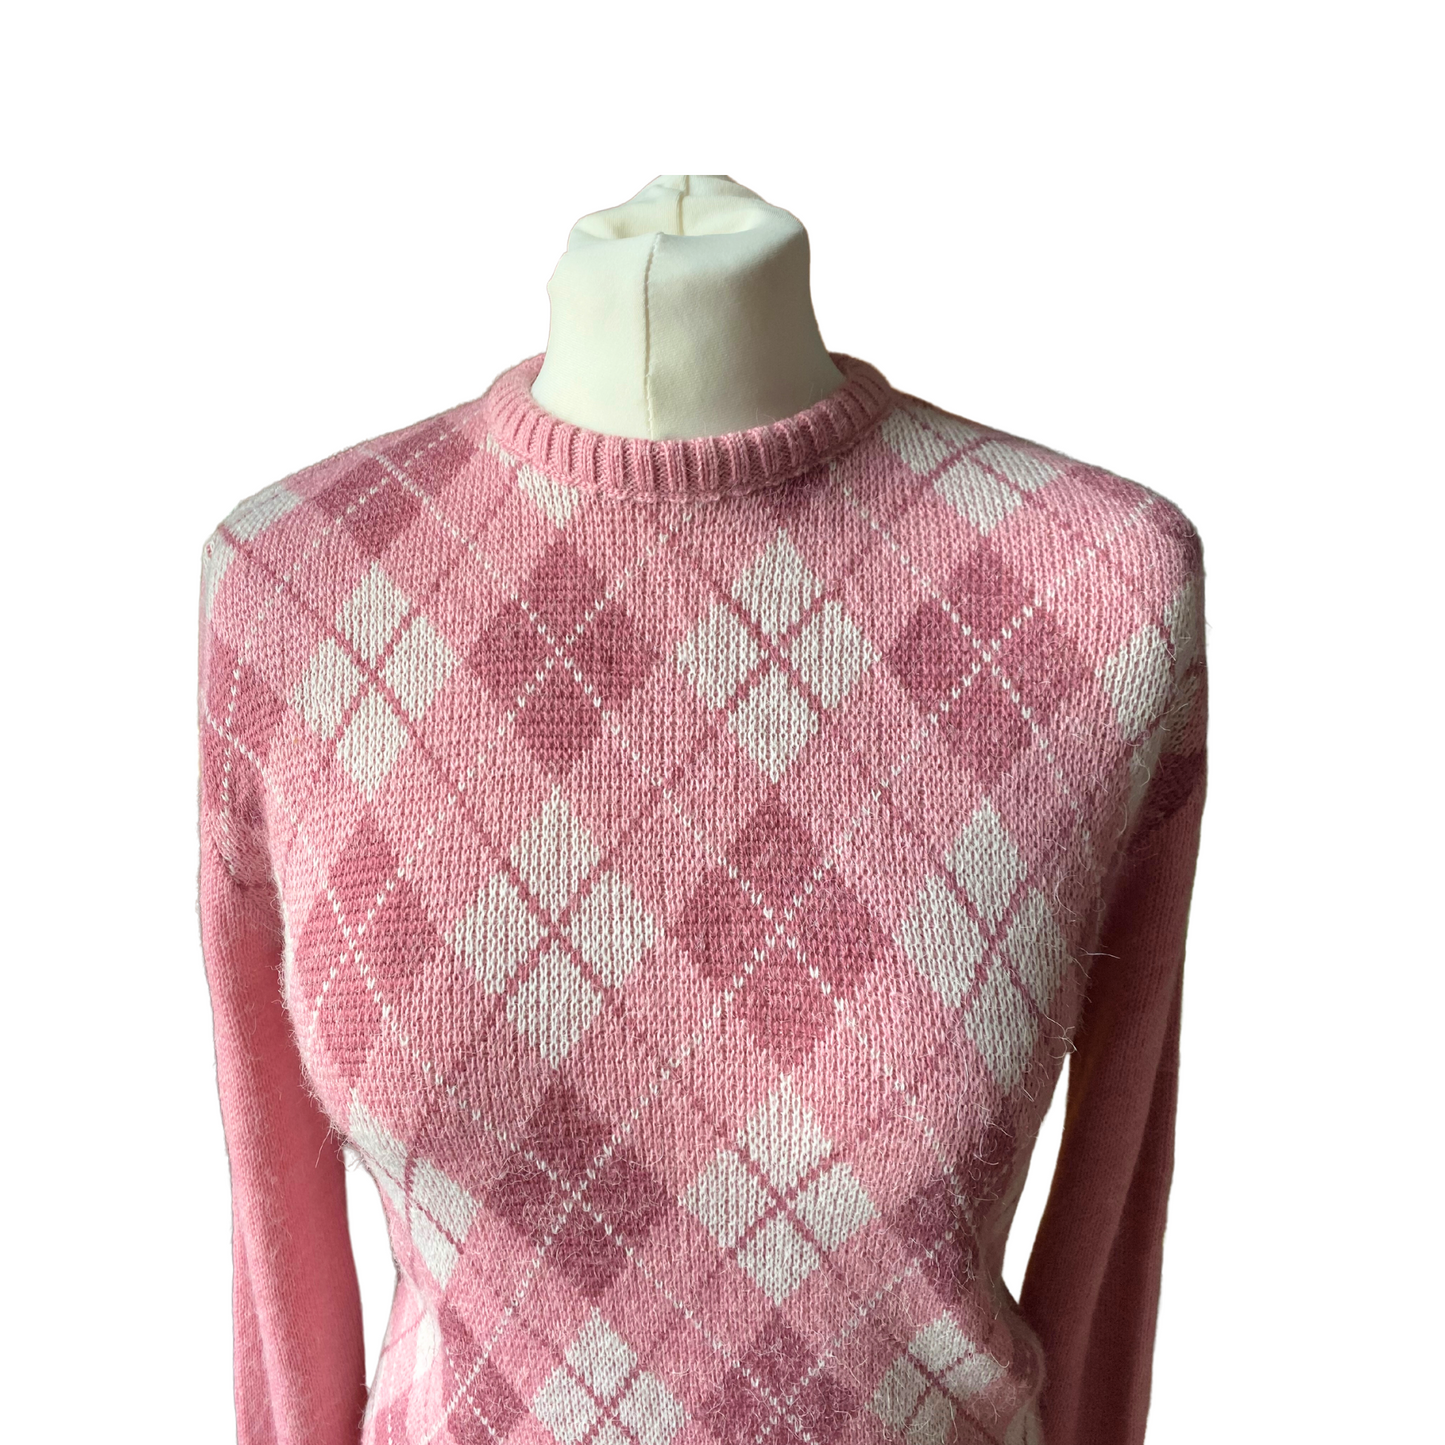 Pink and white fluffy sweater with diamond pattern for easy smart casual look